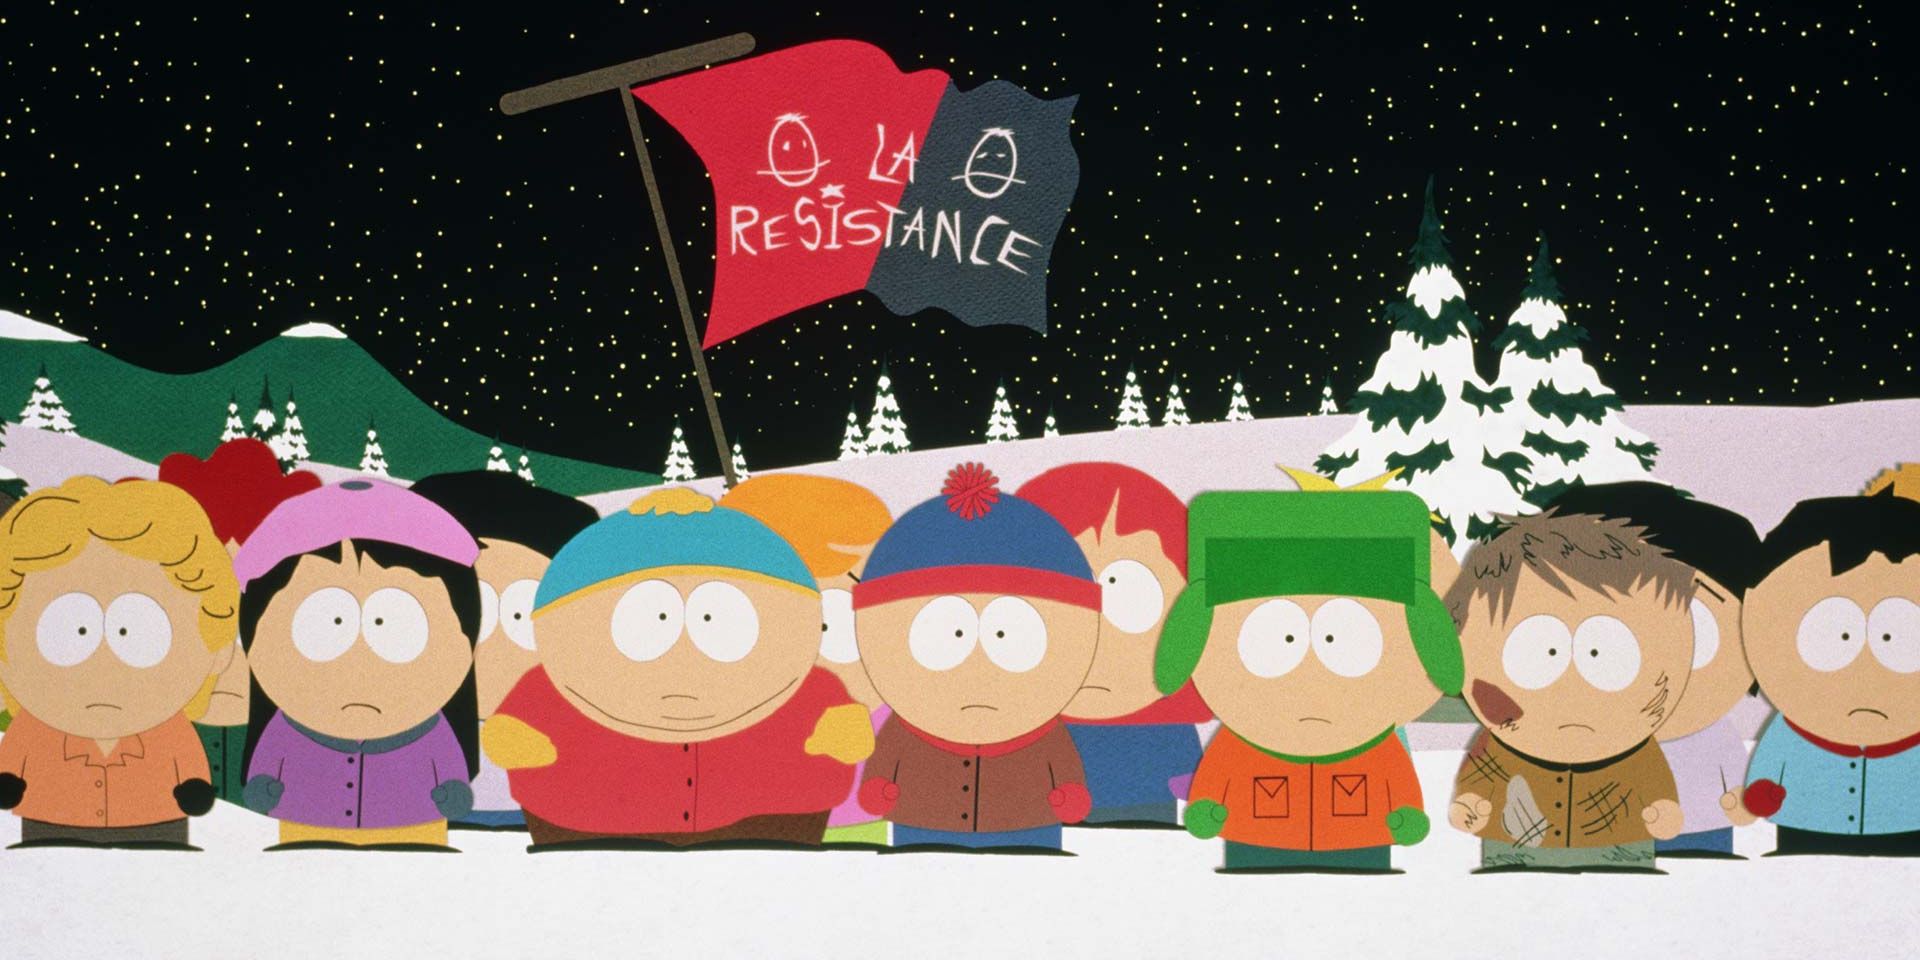 The kids of South Park engage in the La Resistance musical number in South Park: Bigger, Longer & Uncut